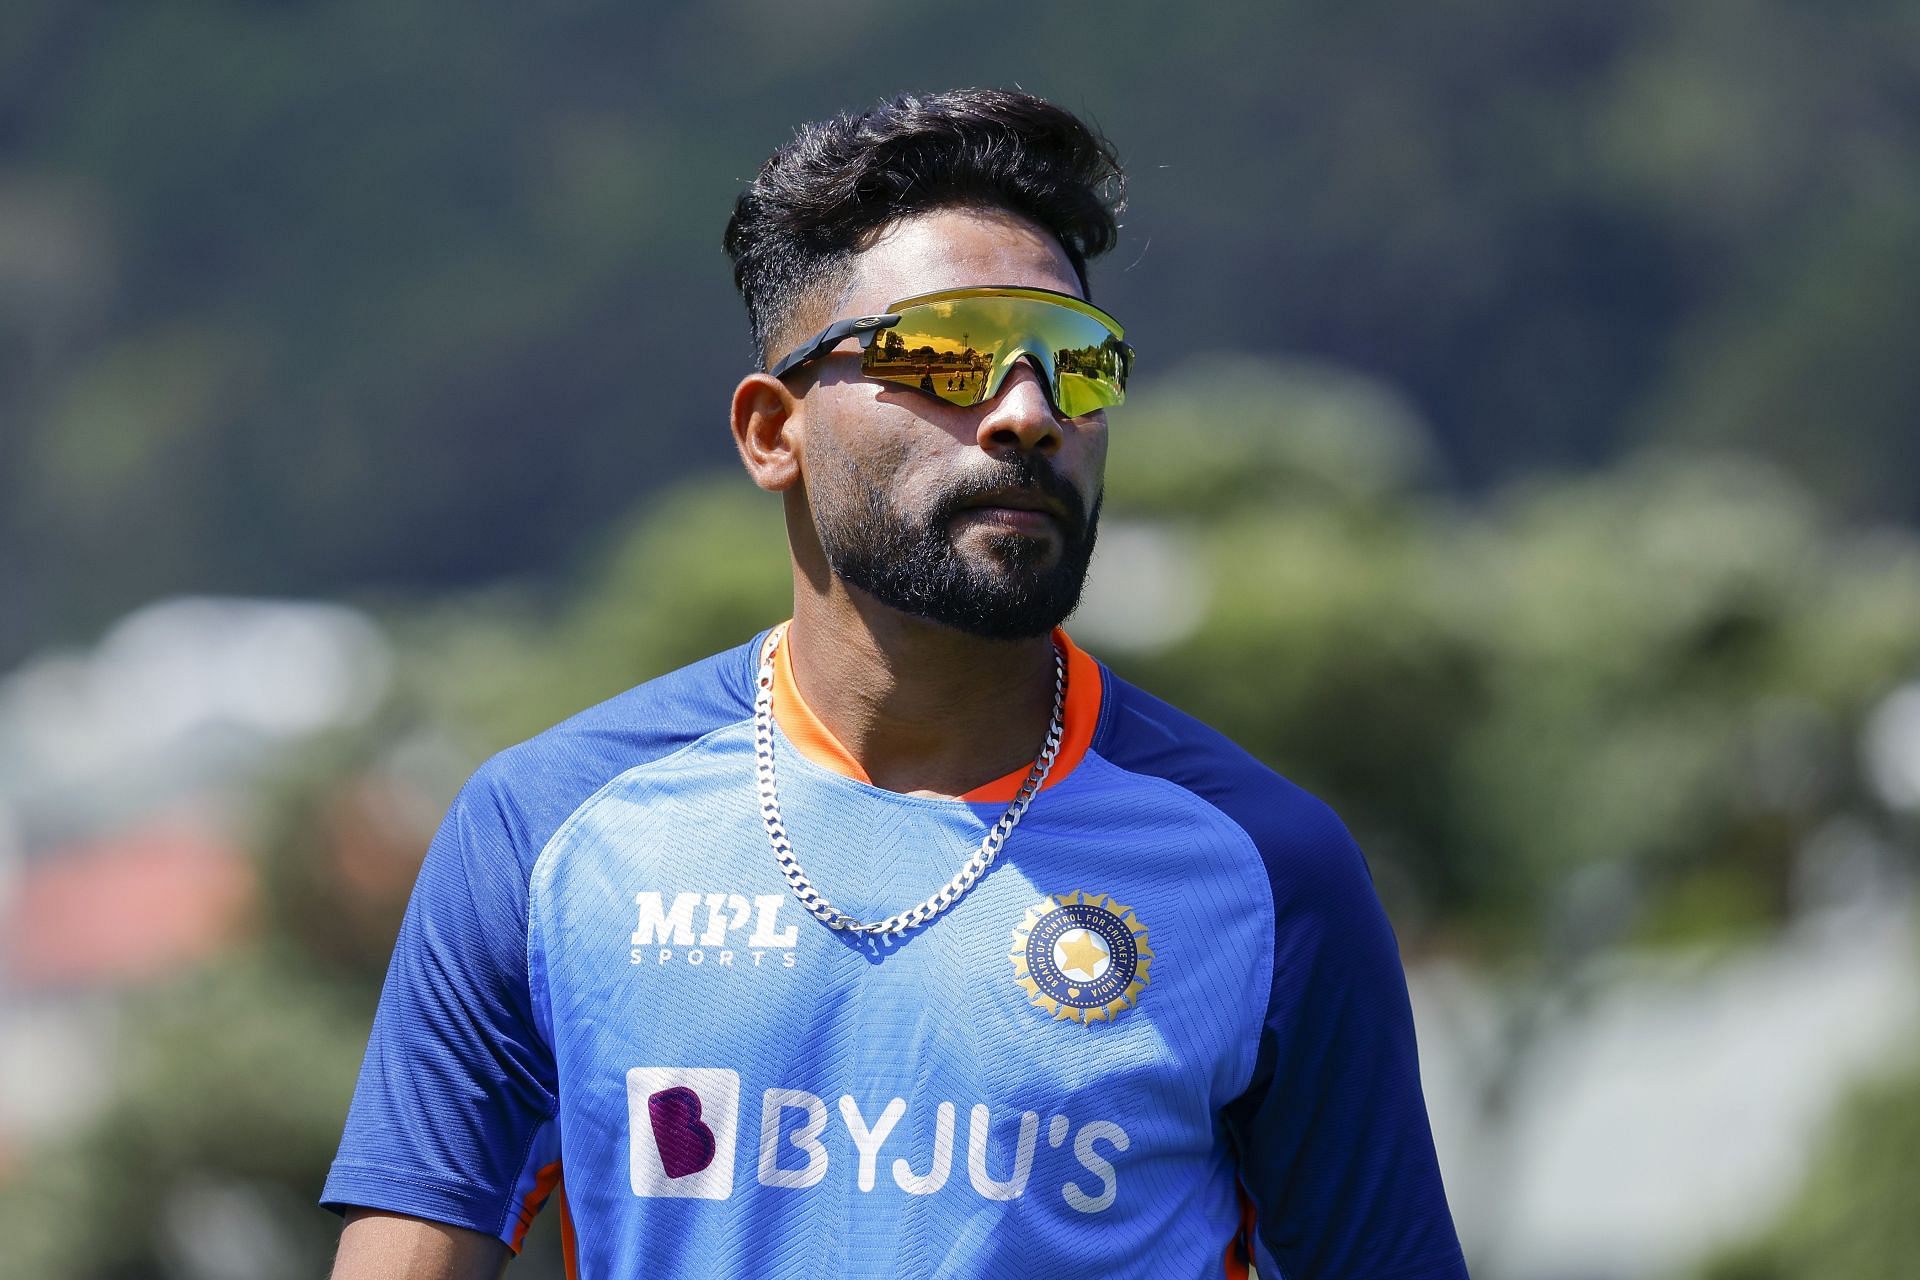 “That’s one area that he needs to work on” – Salman Butt pinpoints wants Mohammed Siraj to improve his fielding